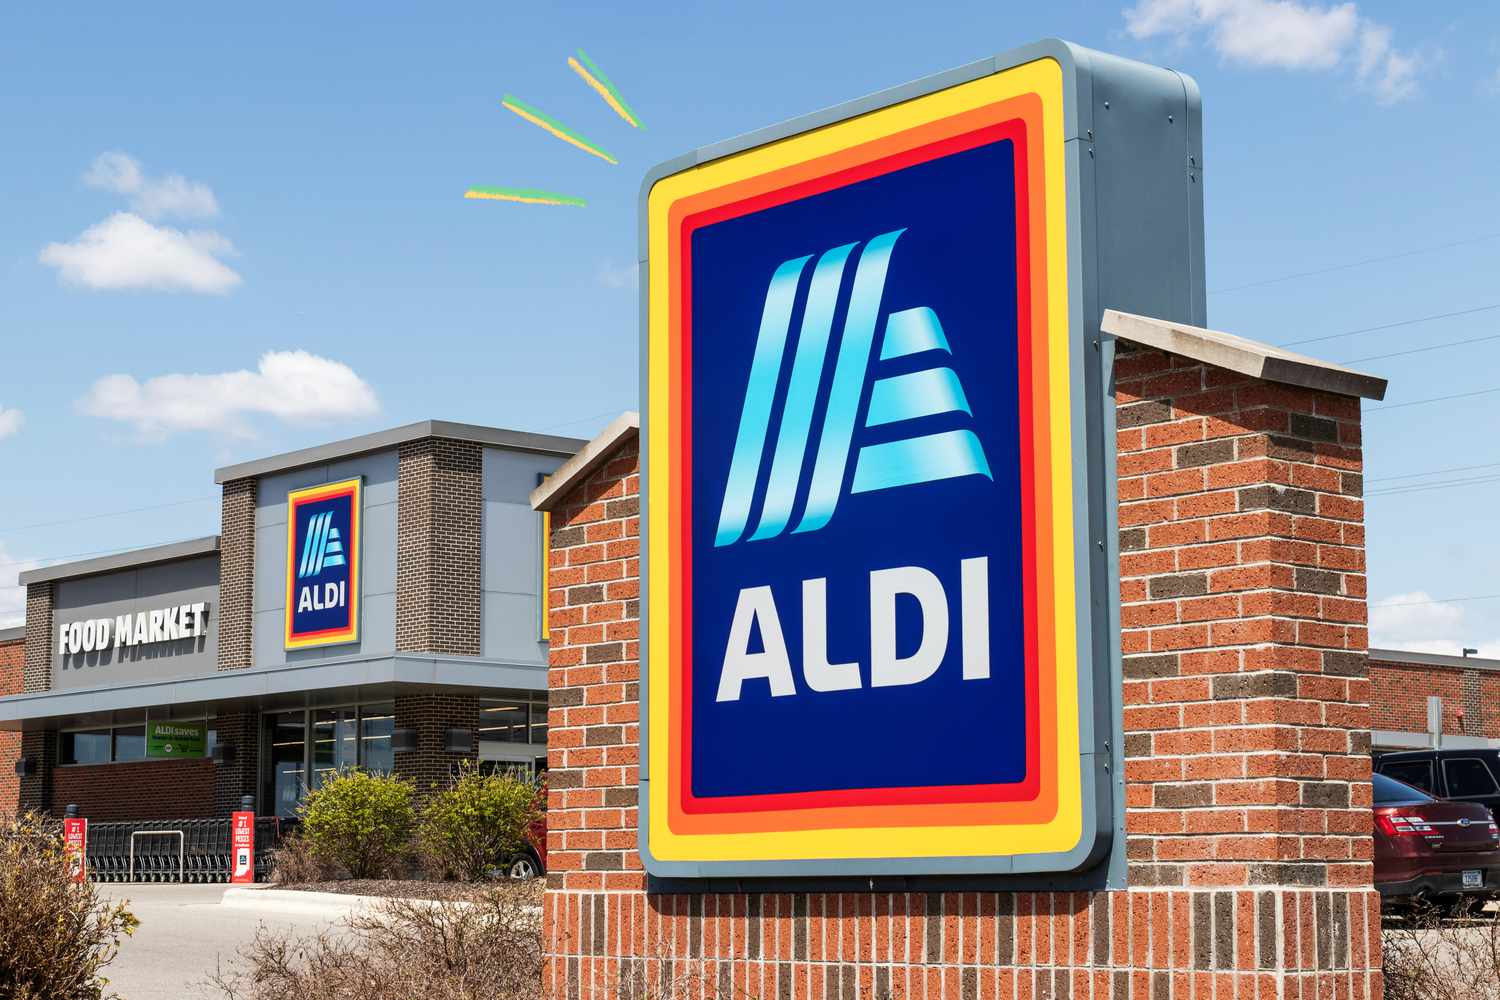 Reddit Says These ALDI Trash Bags Smell “Like Hollister”—A Teenager Weighs In